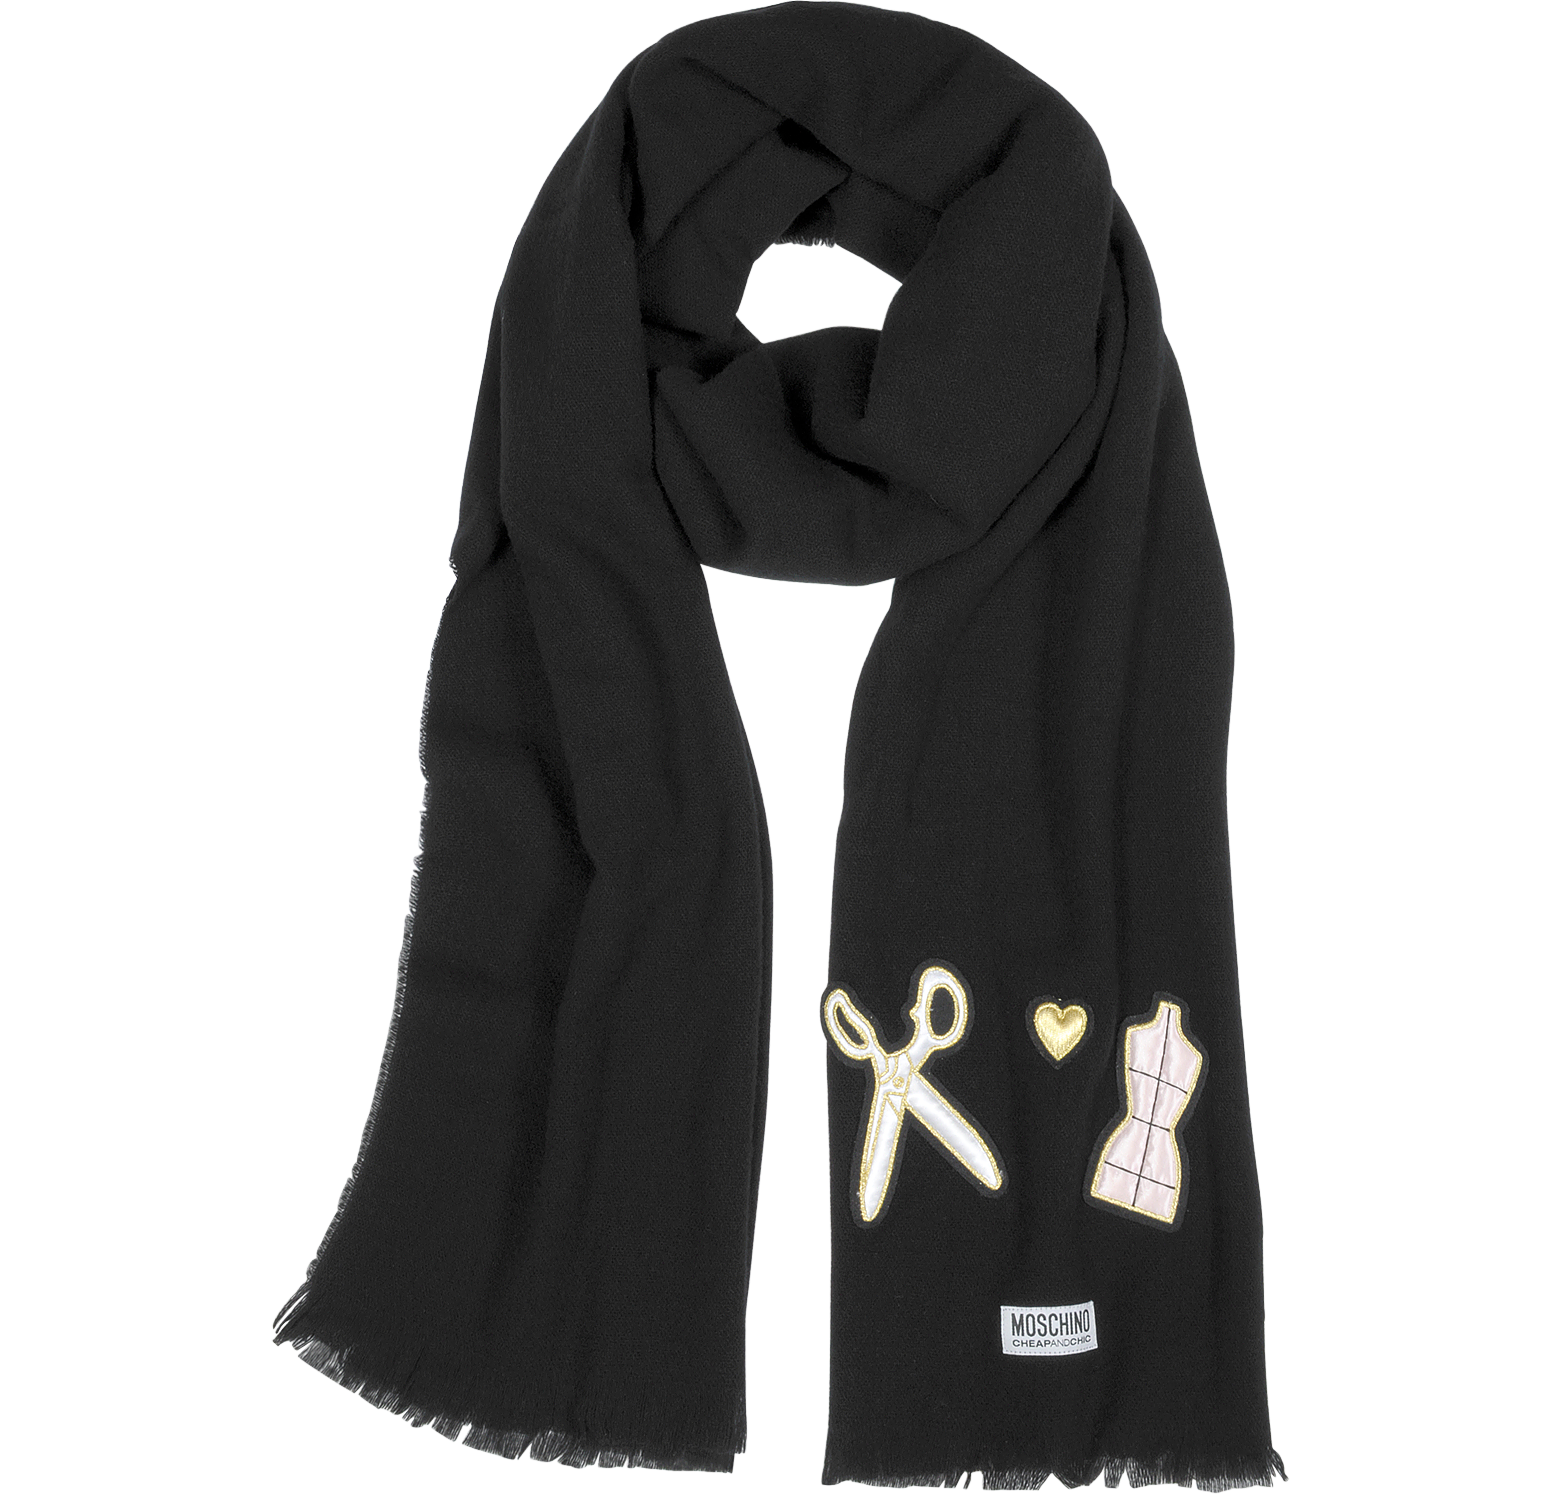 Moschino Black Cheap and Chic Artelier Wool Fringed Scarf at FORZIERI